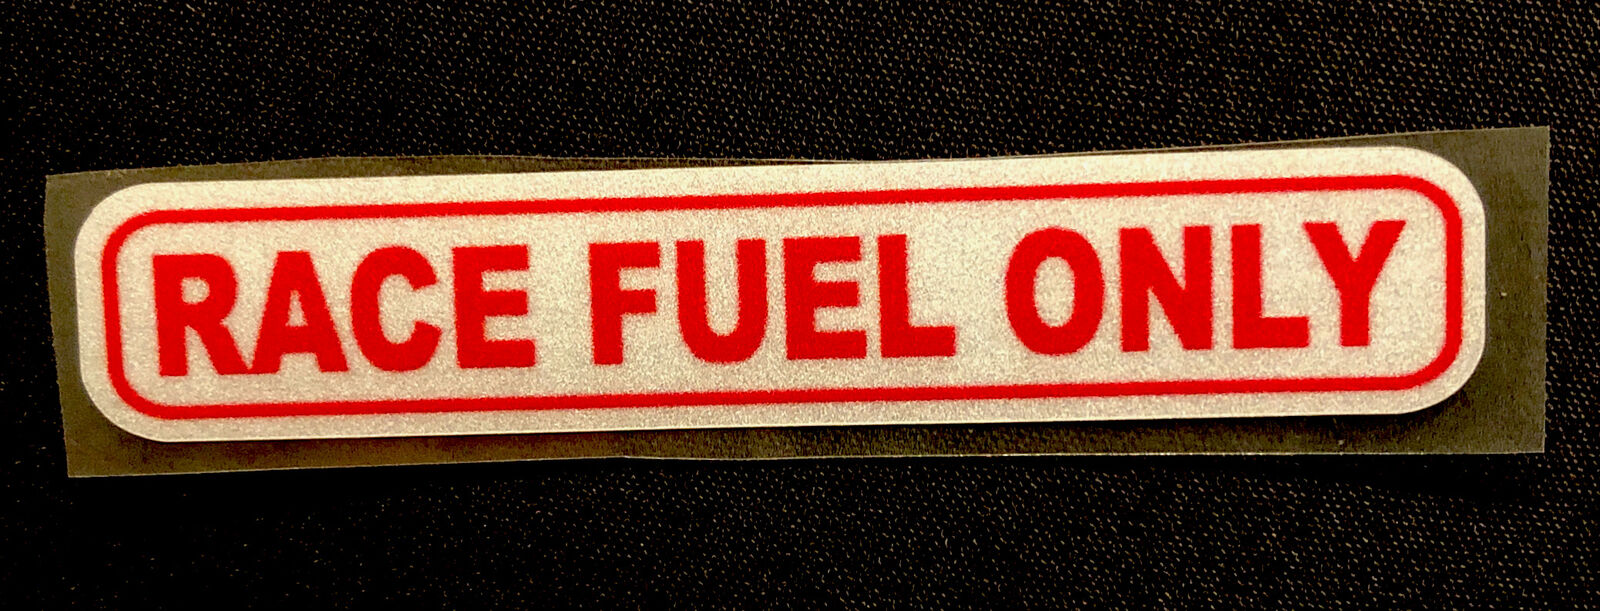 RACE FUEL ONLY STICKER 4” x 3/4” REFLLECTIVE